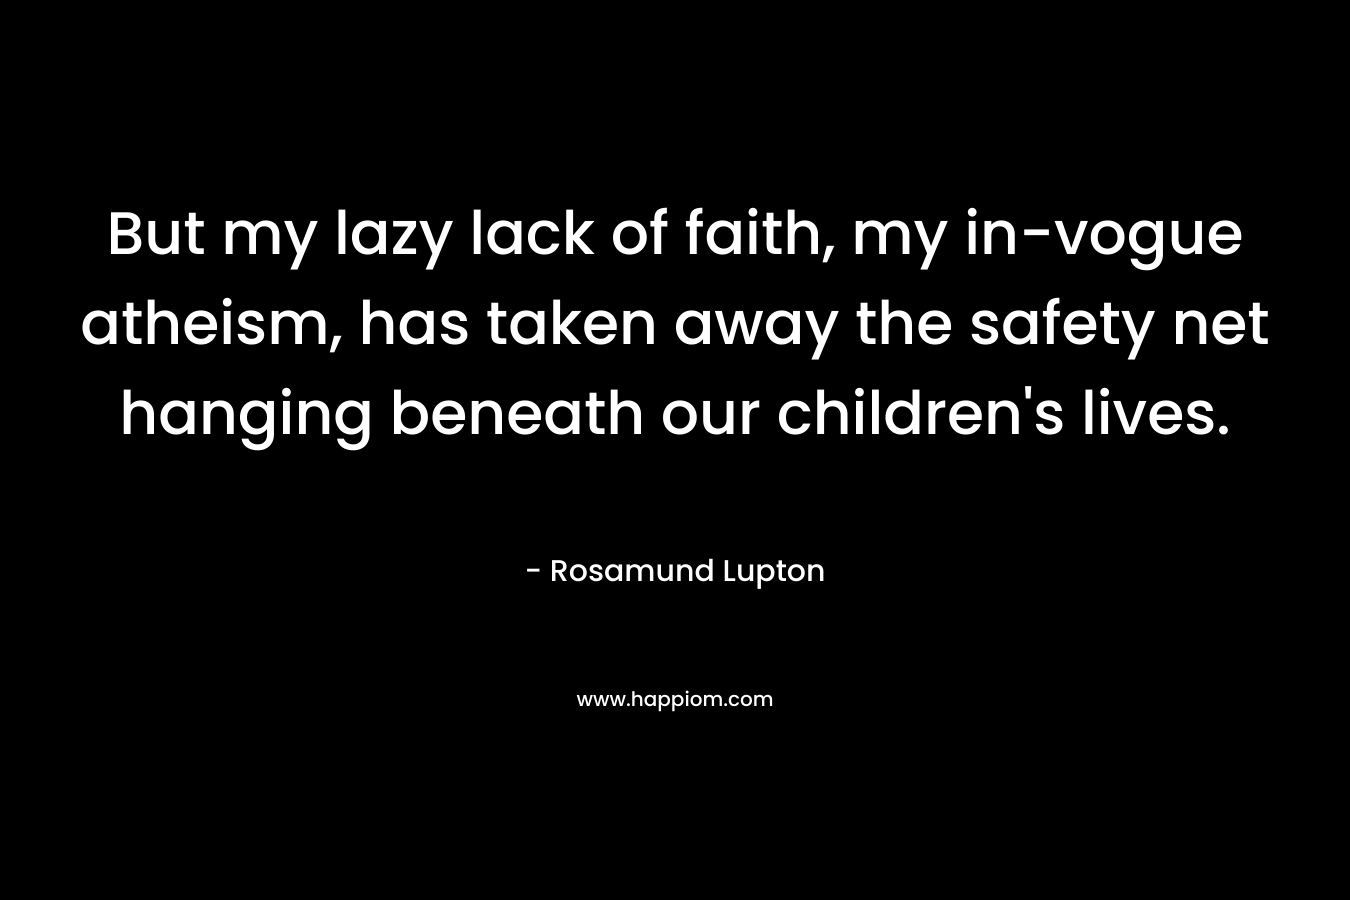 But my lazy lack of faith, my in-vogue atheism, has taken away the safety net hanging beneath our children’s lives. – Rosamund Lupton